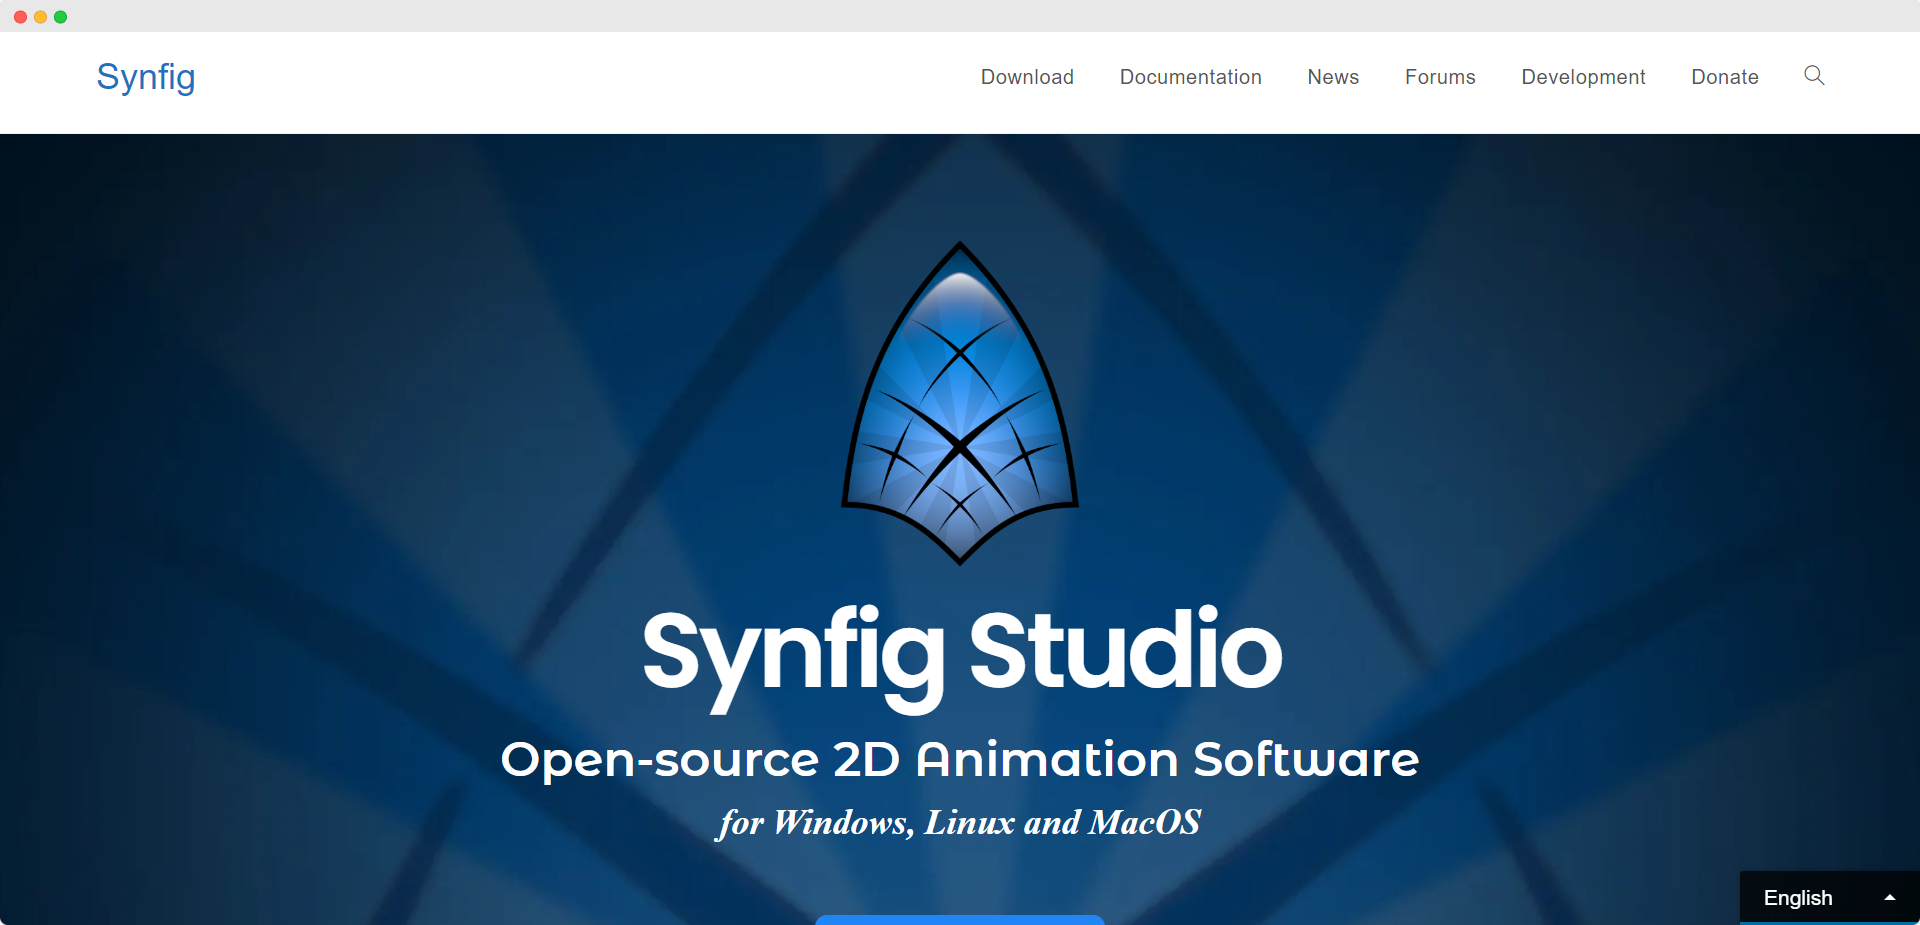 Synfig Studio animation software